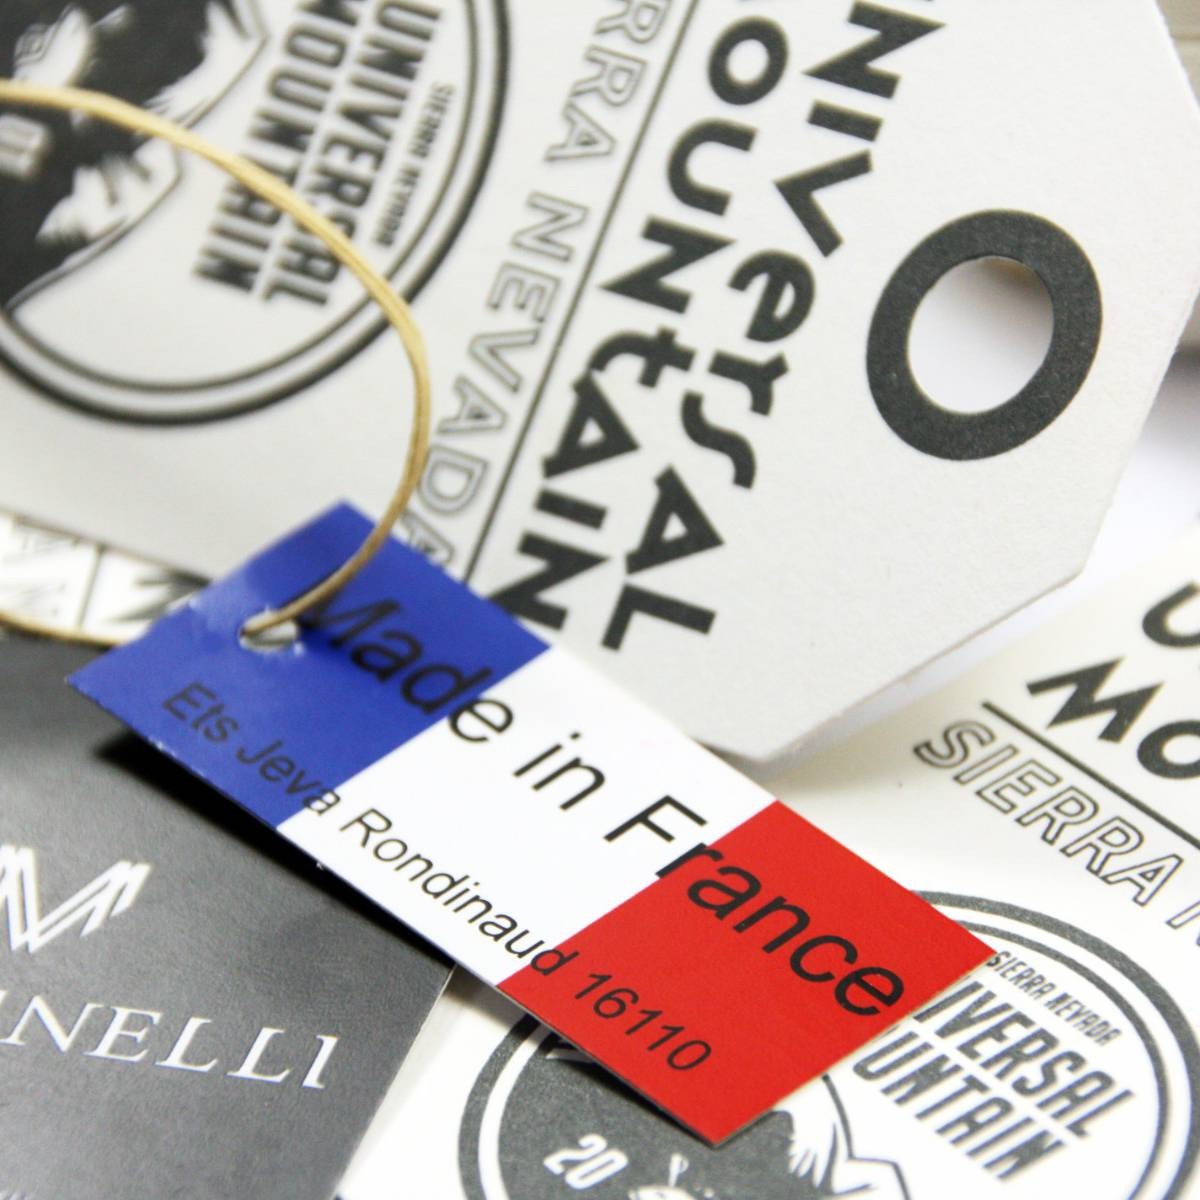 The role of the custom label manufacturer in a product's marketing strategy